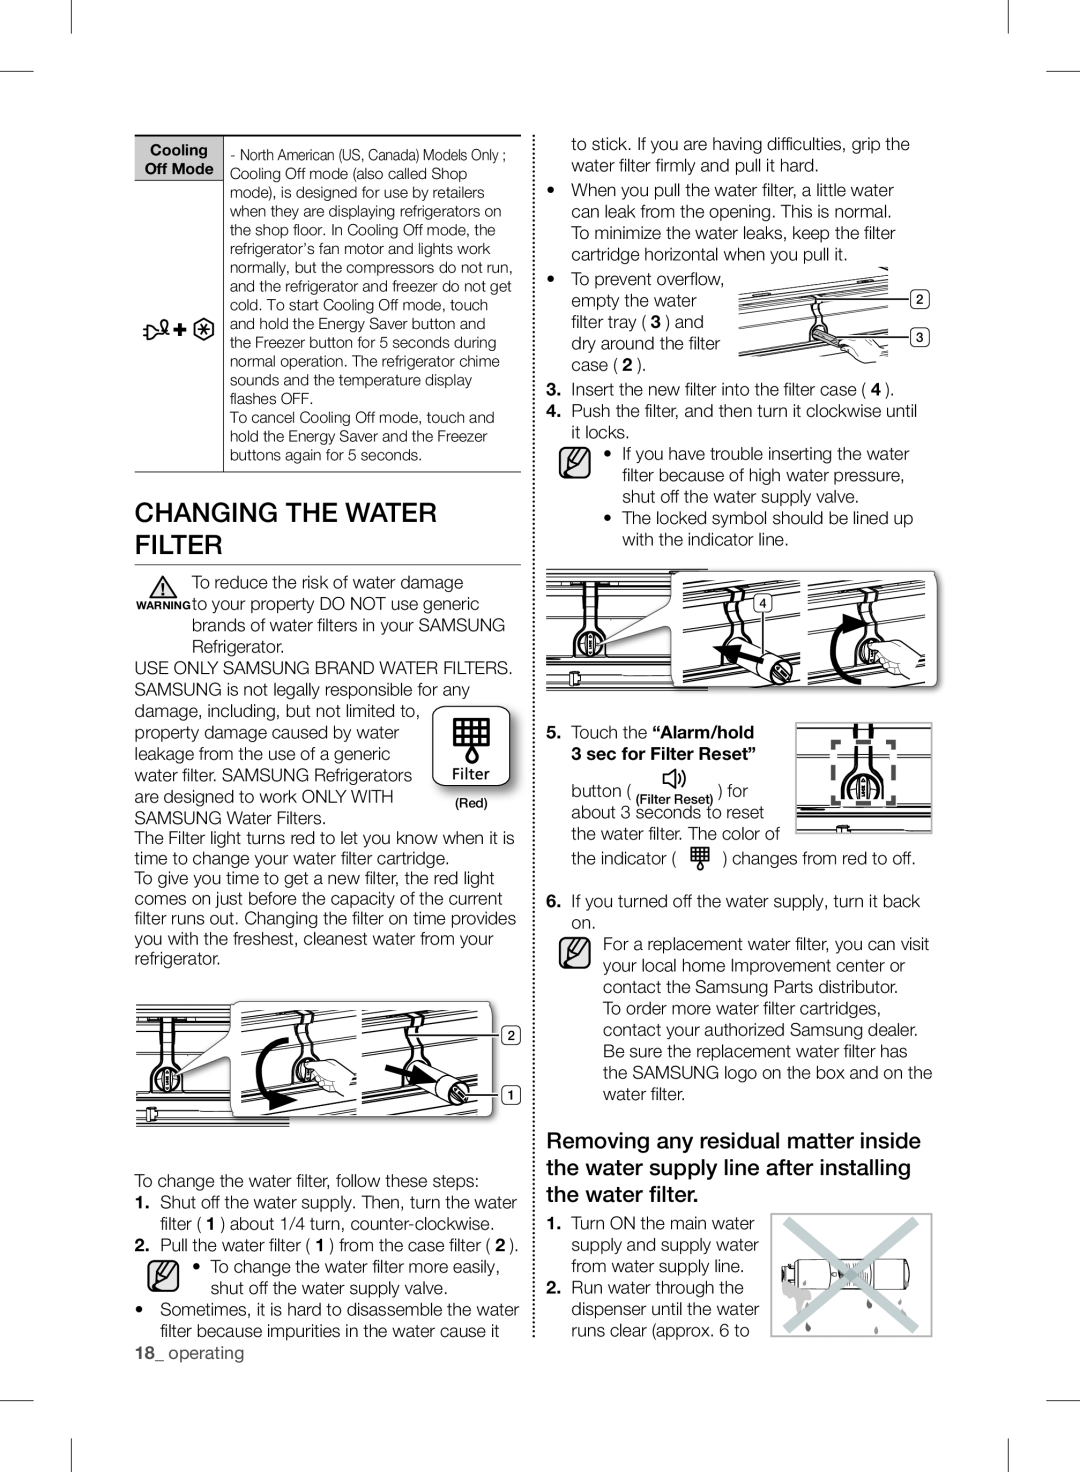 Samsung RF24FSEDBSR user manual Changing The Water Filter, 18_ operating, Touch the “Alarm/hold 3 sec for Filter Reset” 